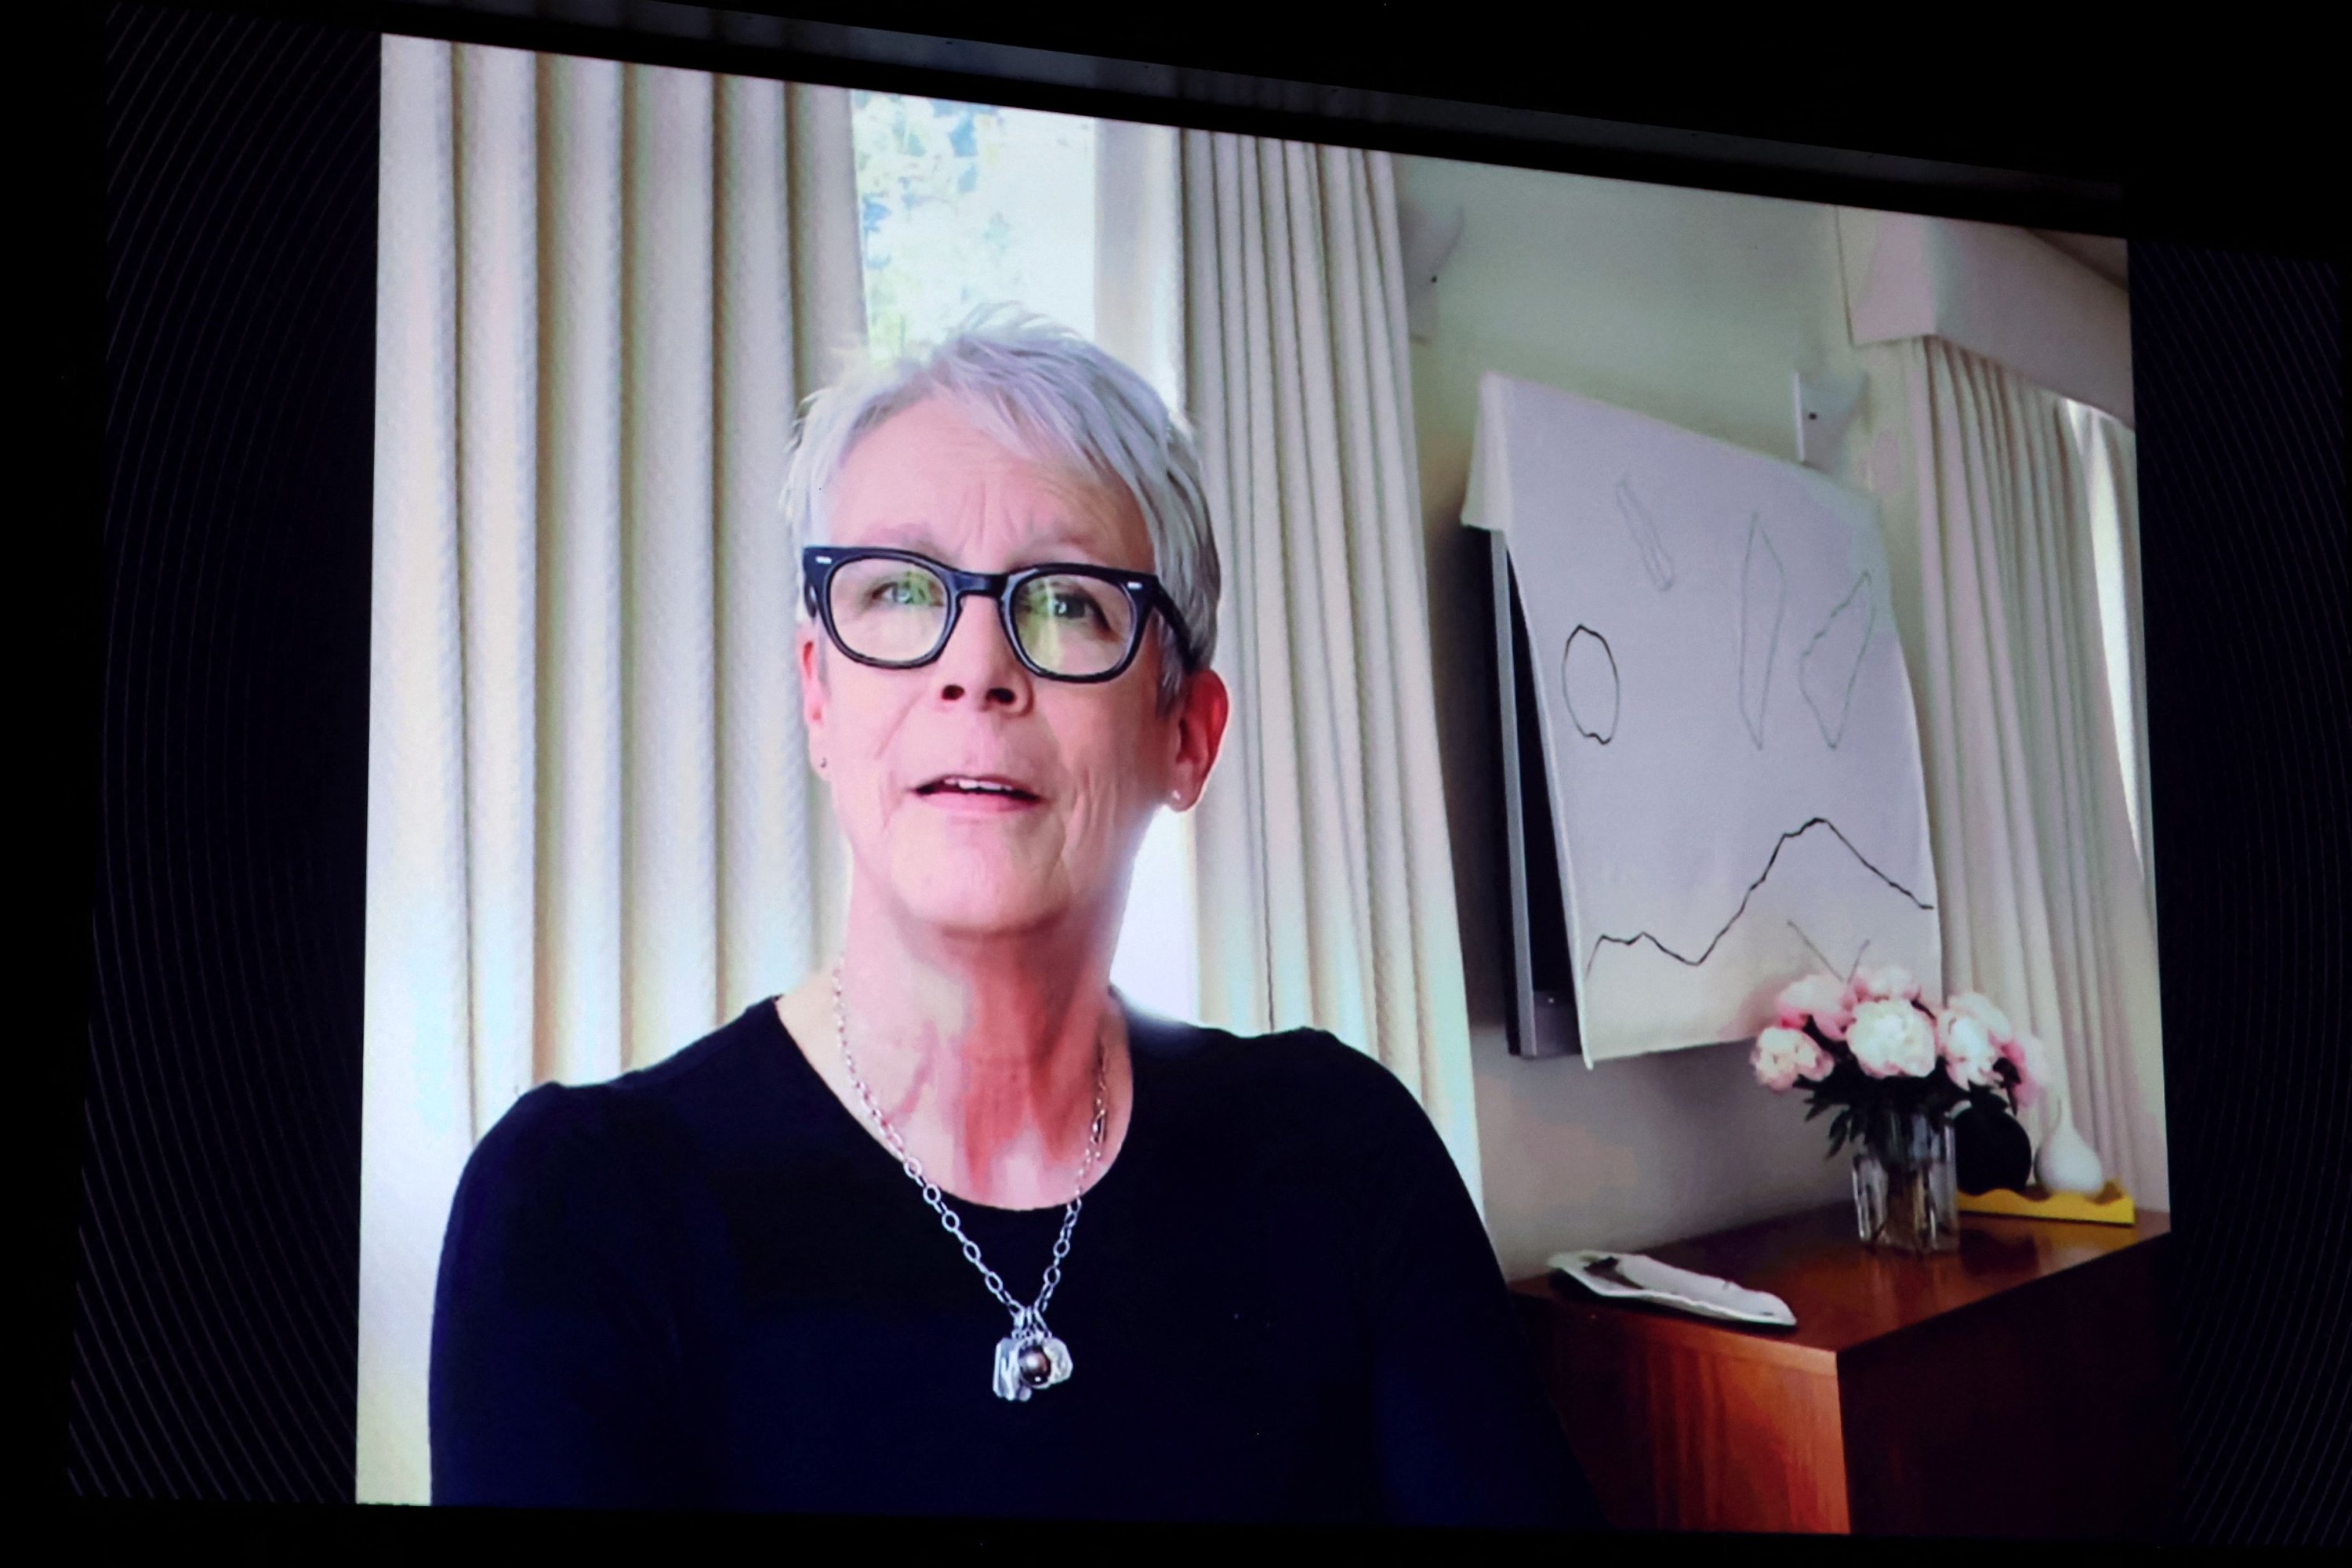 This handout image released by the Hollywood Foreign Press Association (HFPA) shows actress Jamie Lee Curtis speaking onscreen during the 79th Annual Golden Globe Awards at The Beverly Hilton on January 9, 2022, in Beverly Hills, California. (AFP)